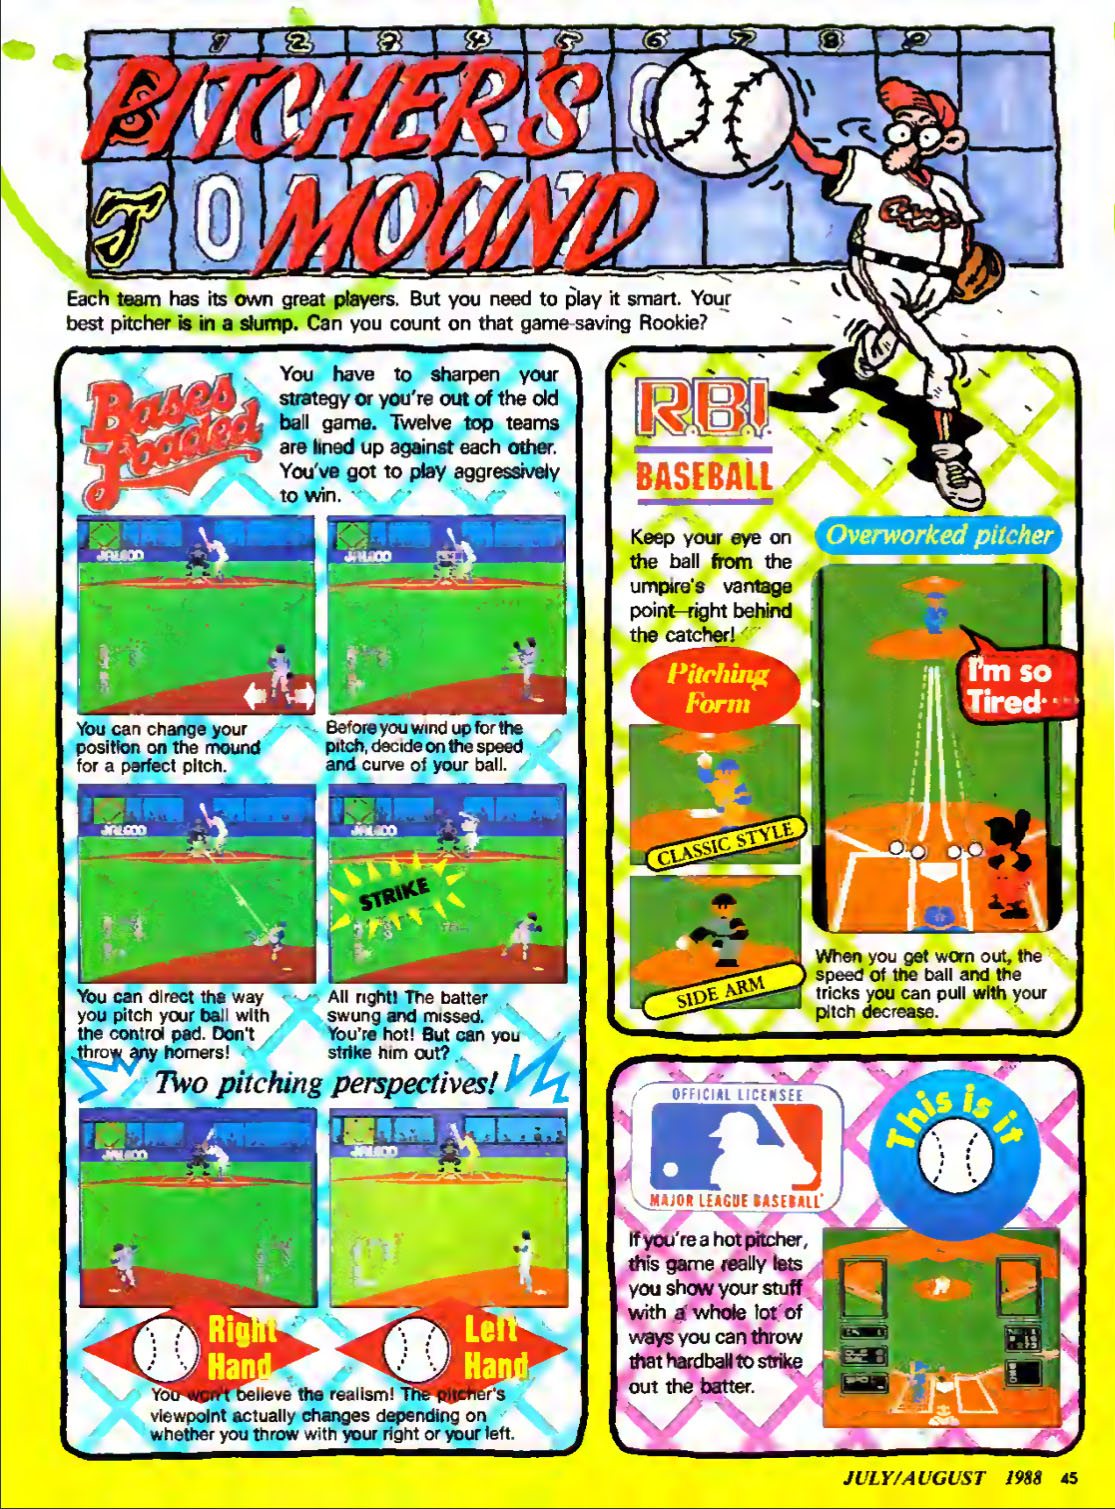 Baseball Round Up, Nintendo Power July-August 1988 page 45